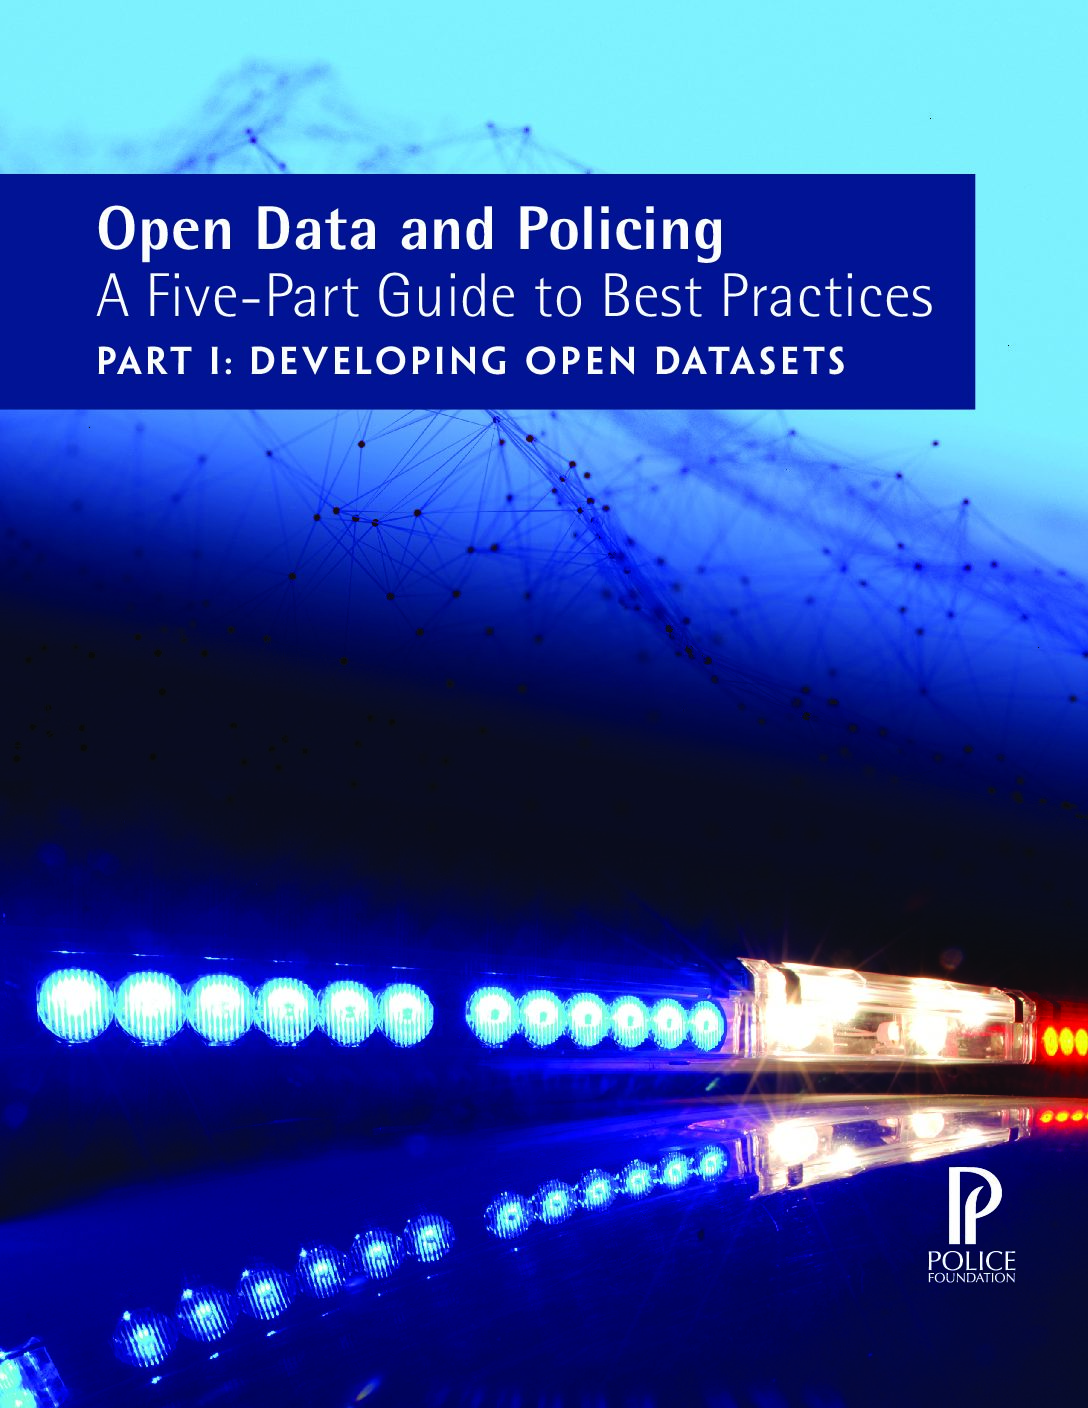 Open Data and Policing Guide